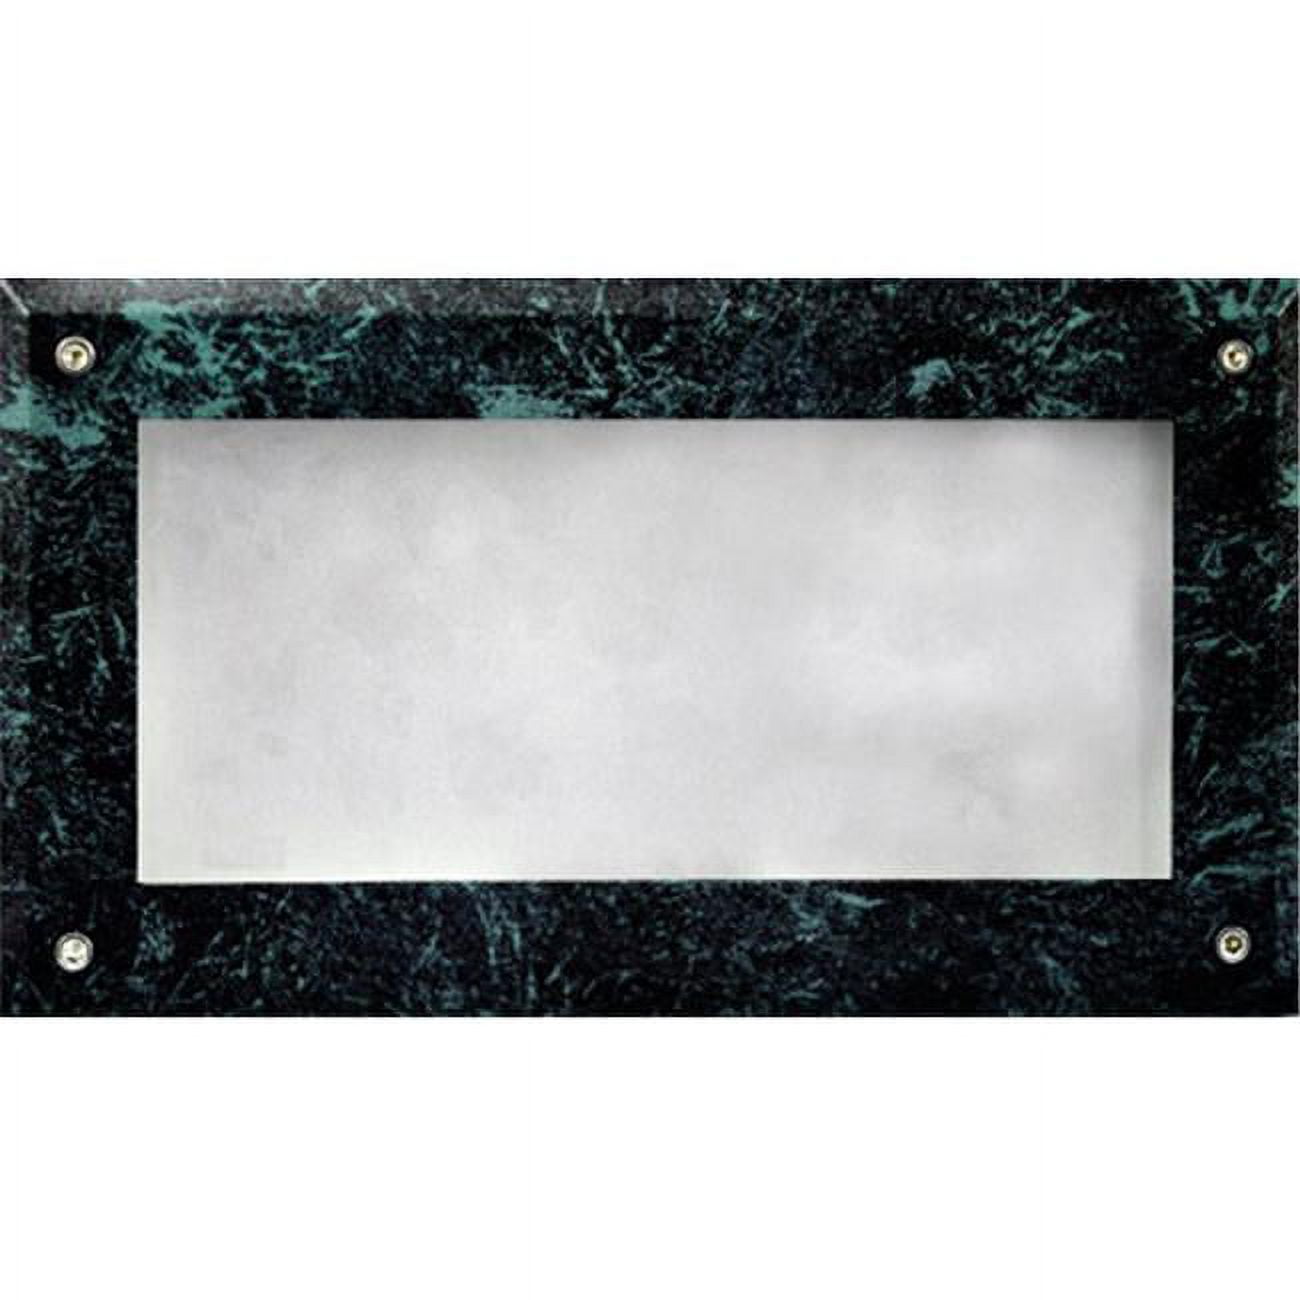 Picture of Dabmar Lighting DSL1001-VG Recessed Open Face Brick, Step & Wall Light, Verde Green - 5 x 8.90 x 3.15 in.